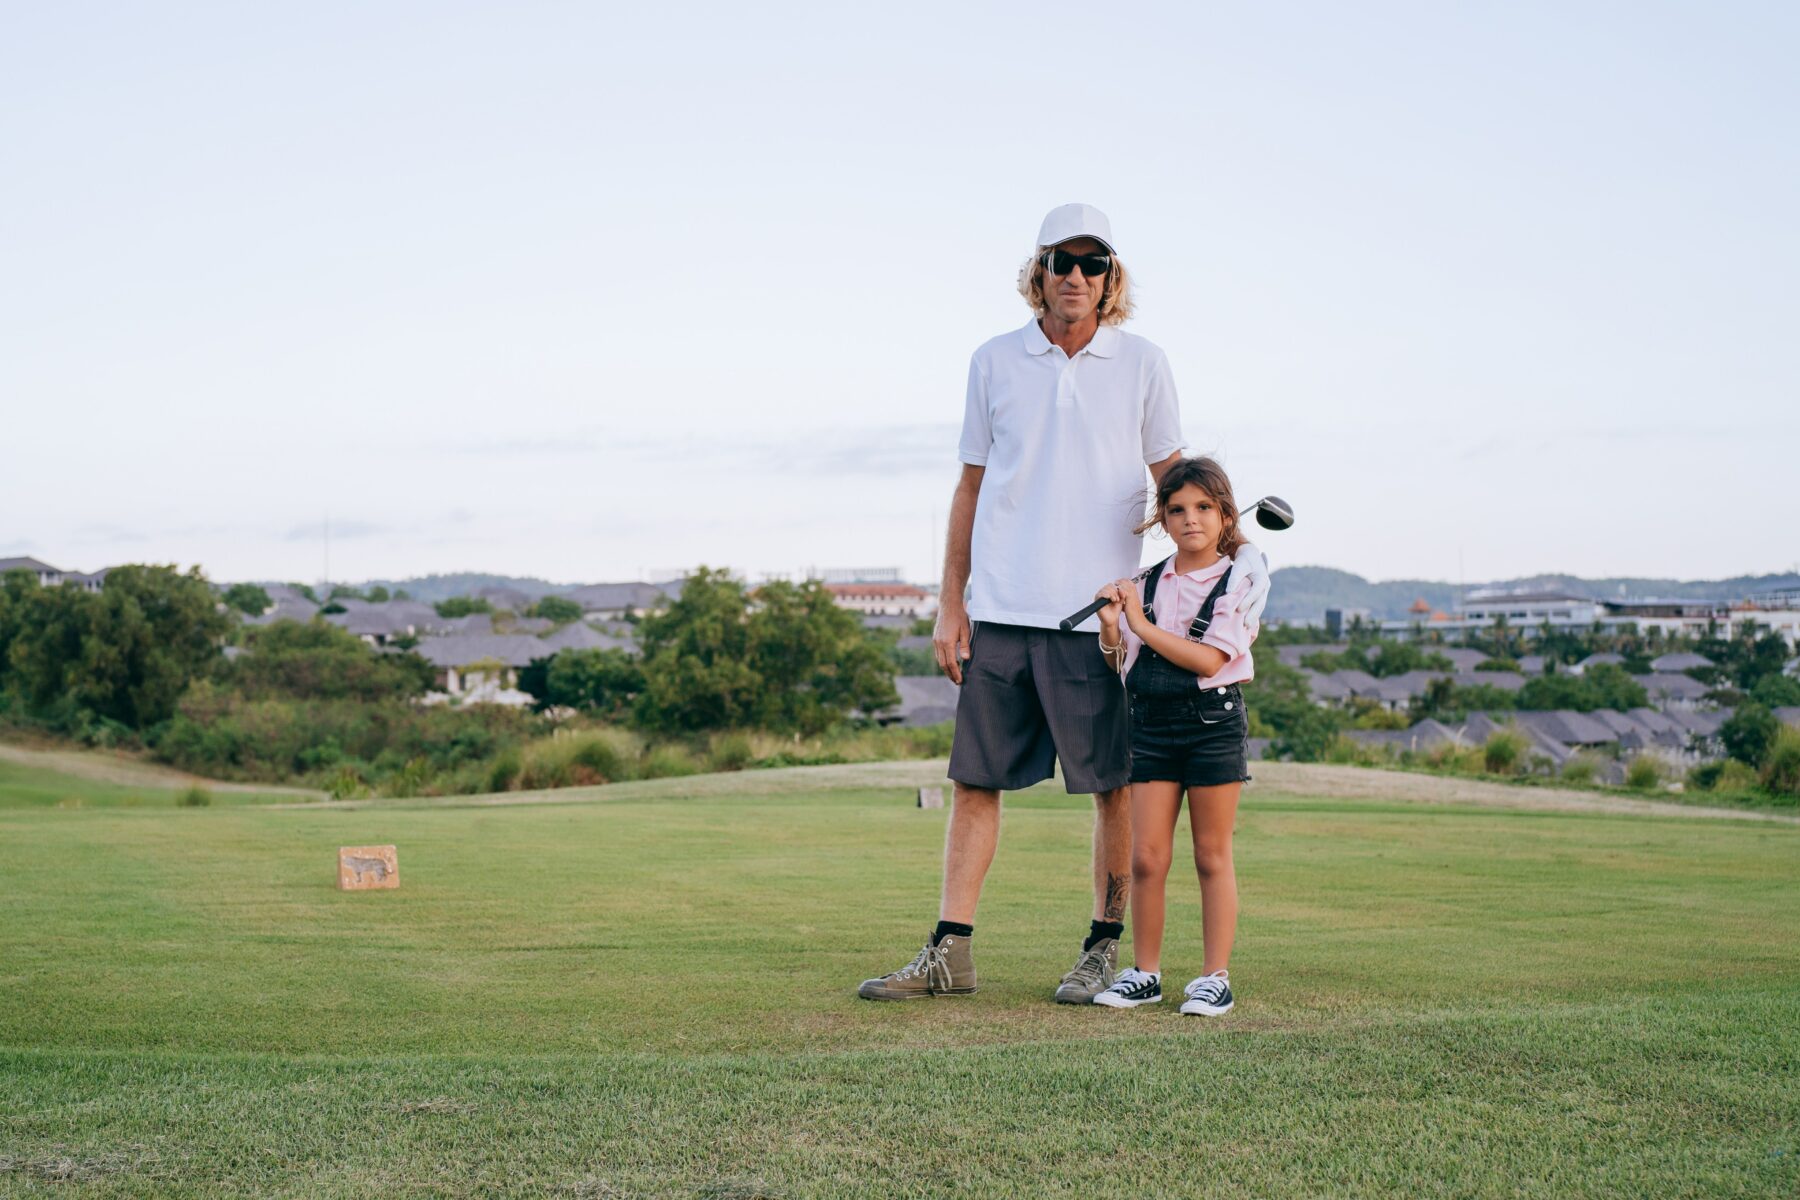 Dad and daughter golfing.